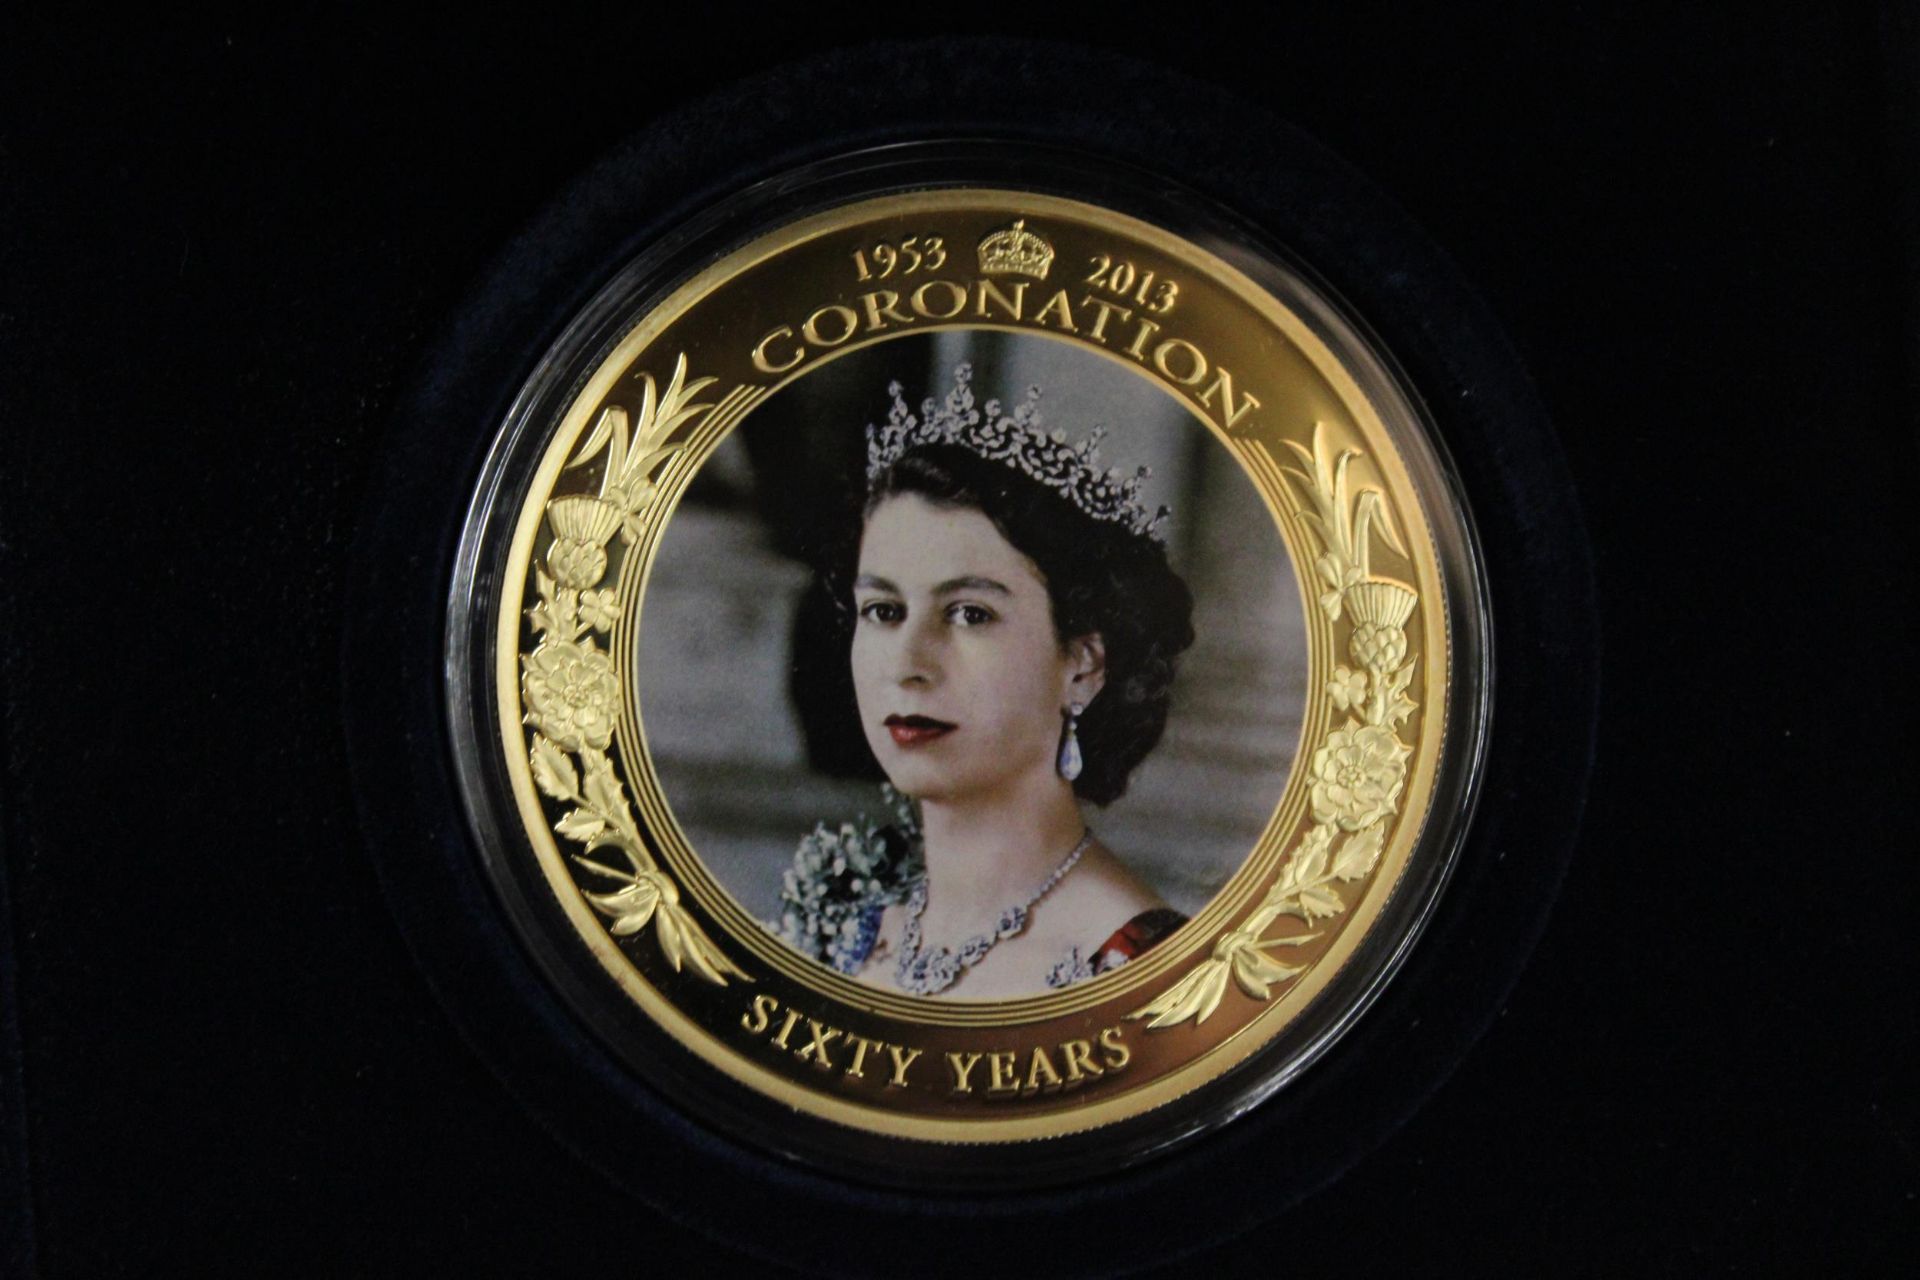 A BOXED 2013 CORONATION JUBILEE 65MM COIN WITH CERTIFICATE OF AUTHENTICITY - Image 3 of 4